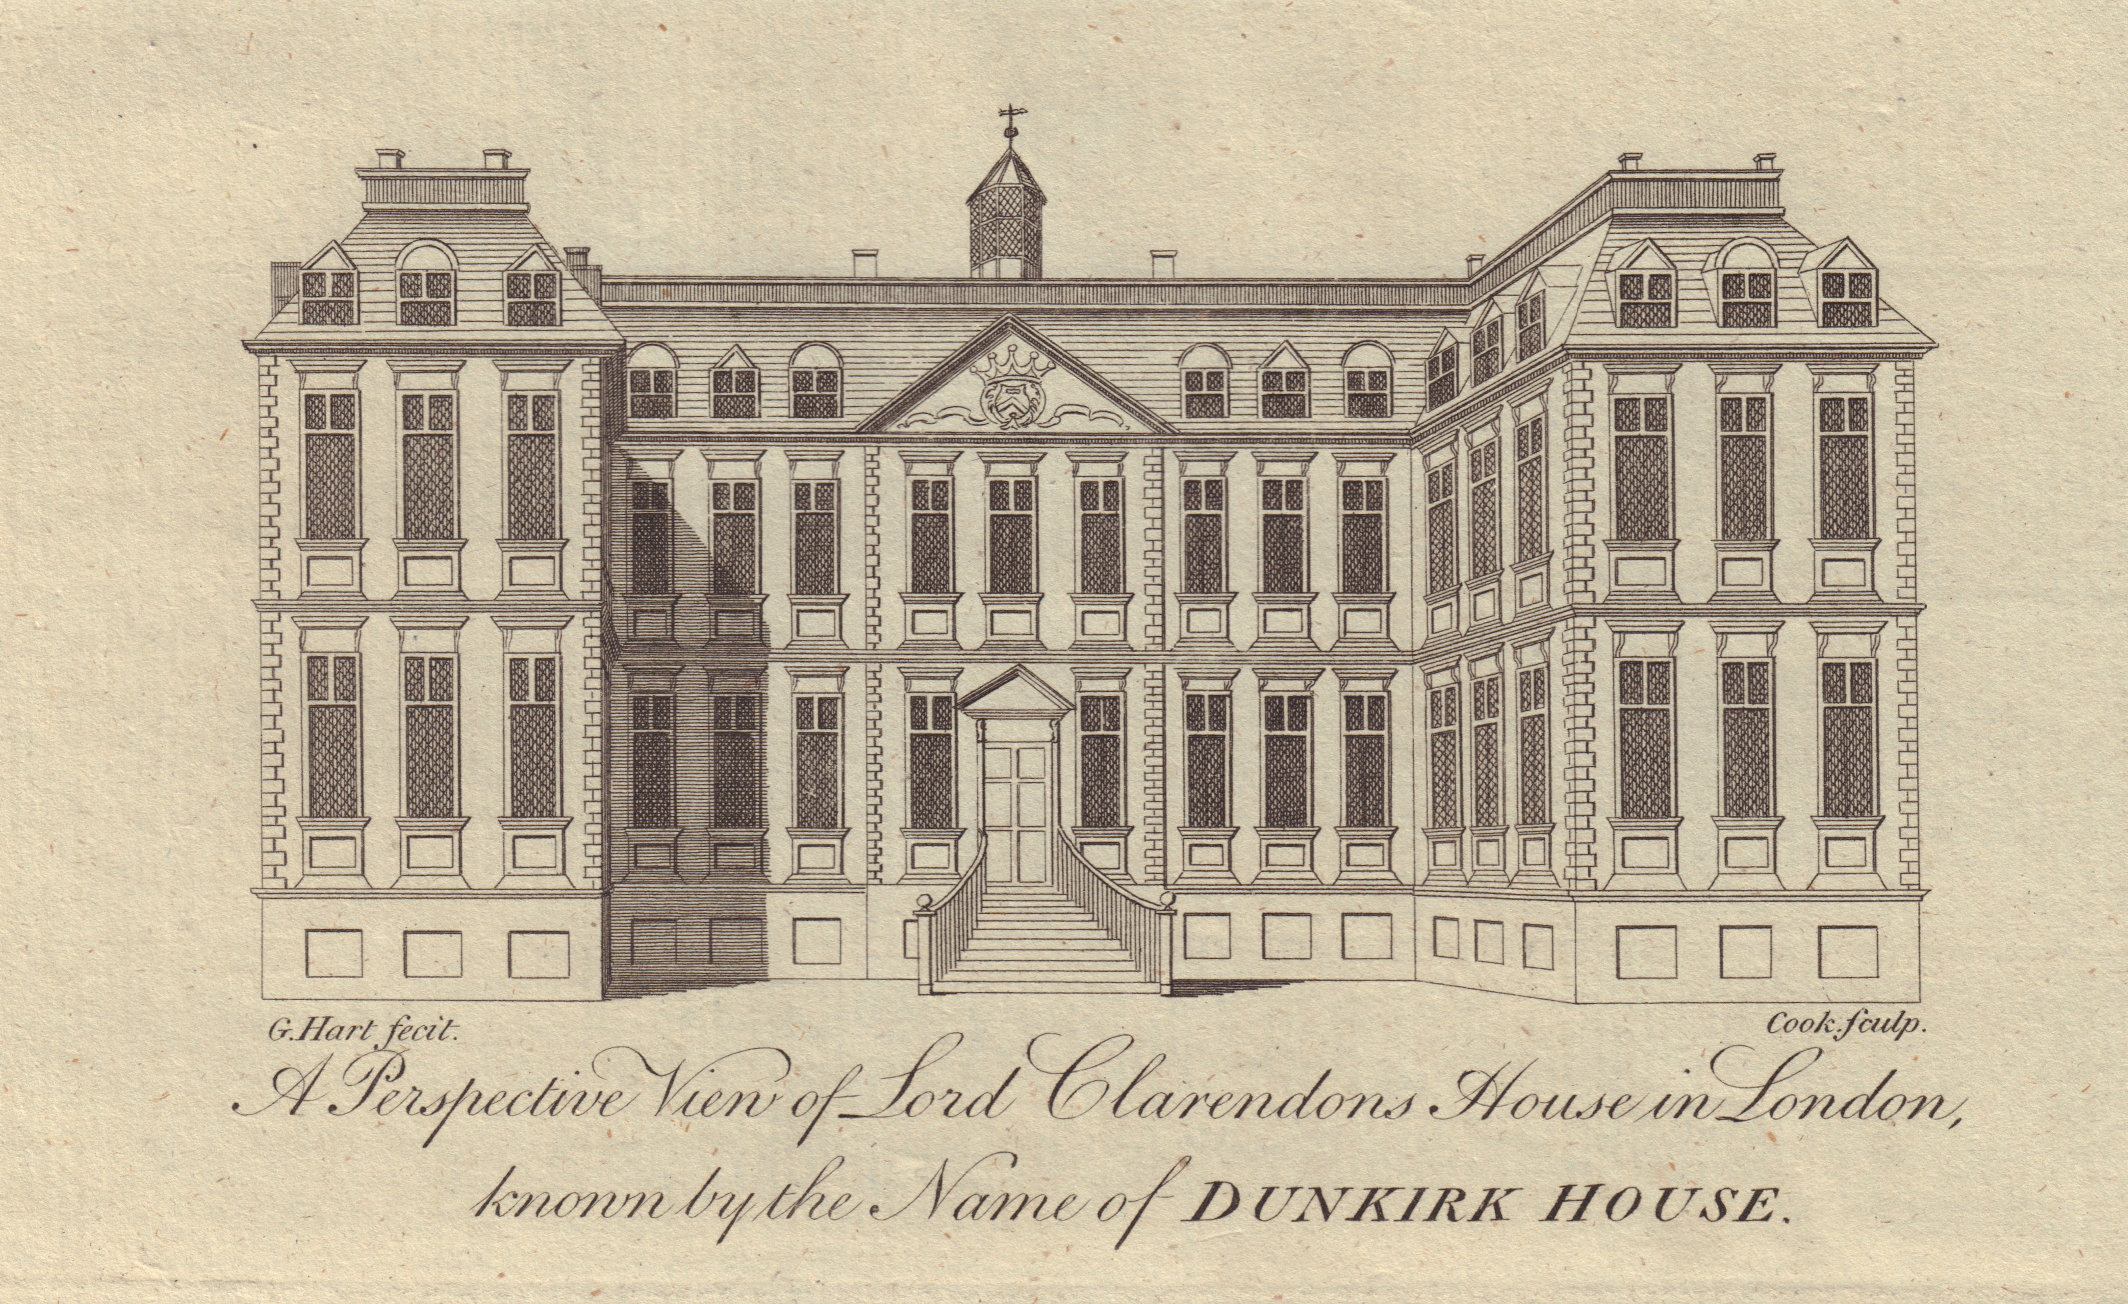 Lord Clarendon's House in London, Dunkirk House. GENTS MAG 1789 old print